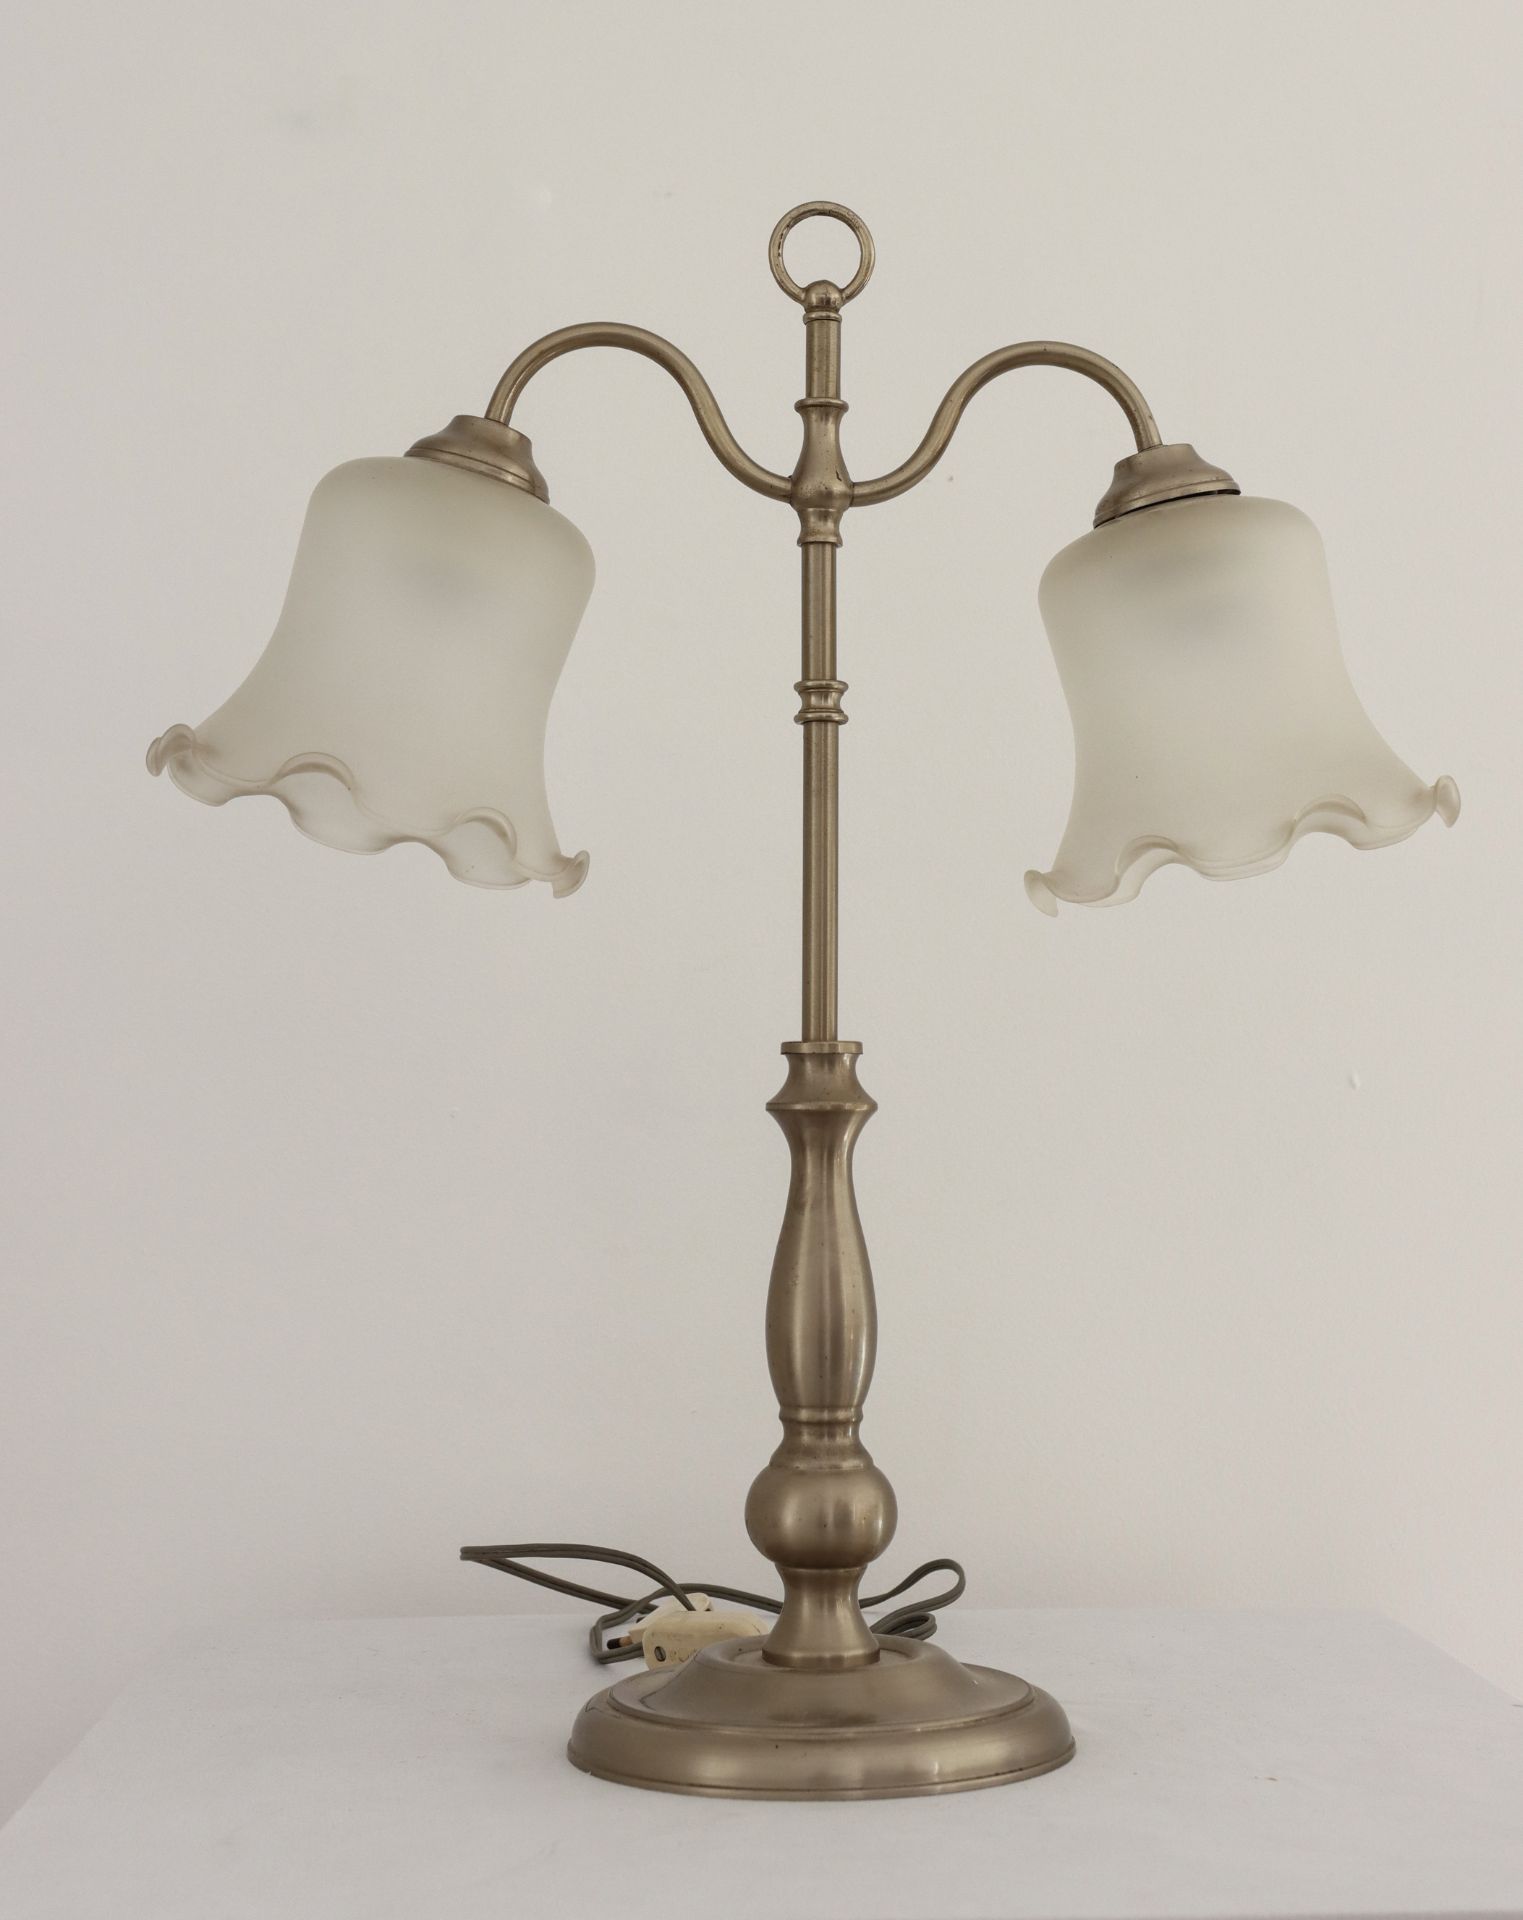 Lot of 2 Vintage lamps - Image 3 of 3